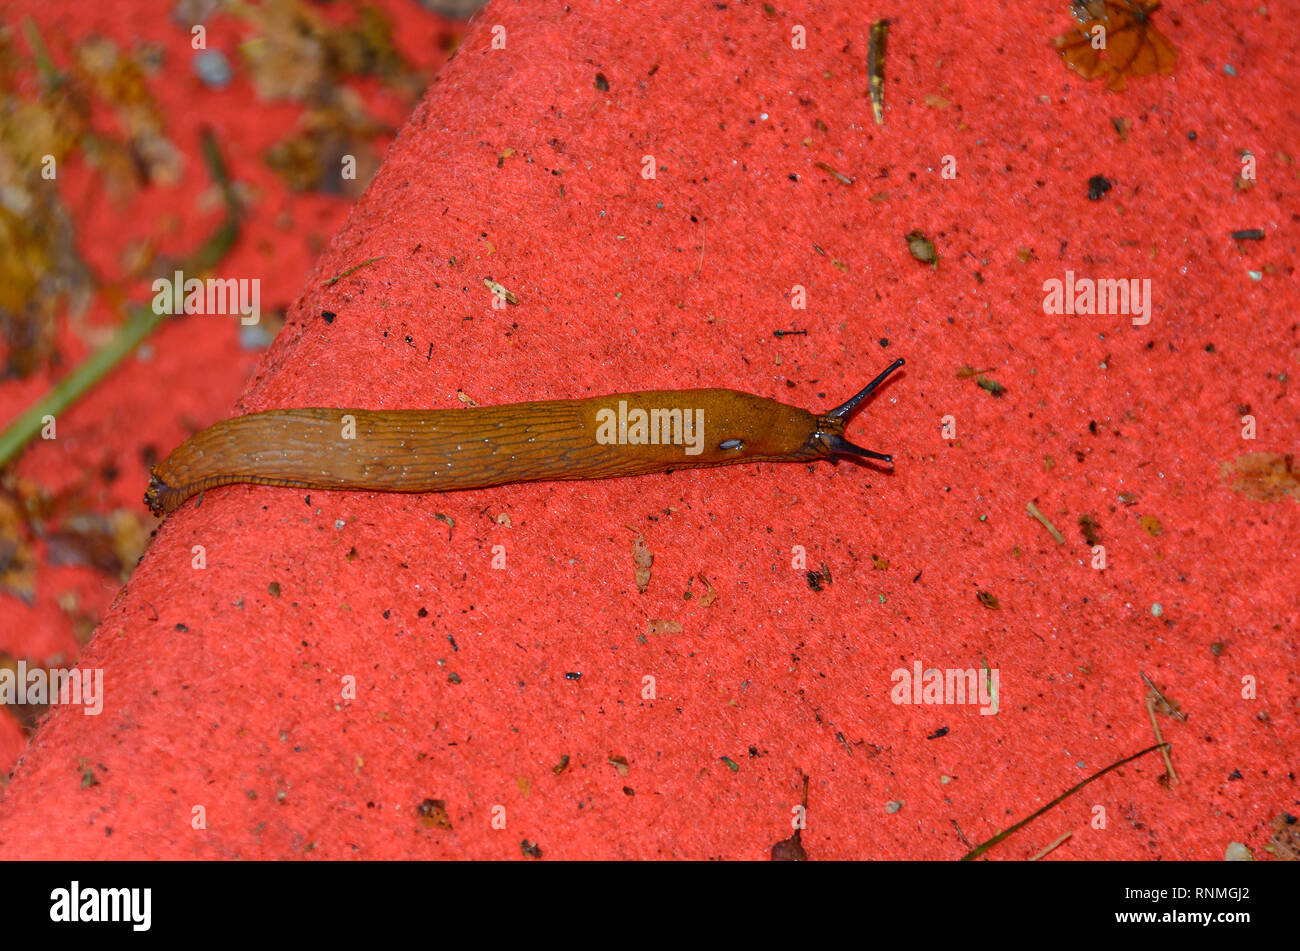 Snail without shell on the ground, open antenas, red background close up. Stock Photo